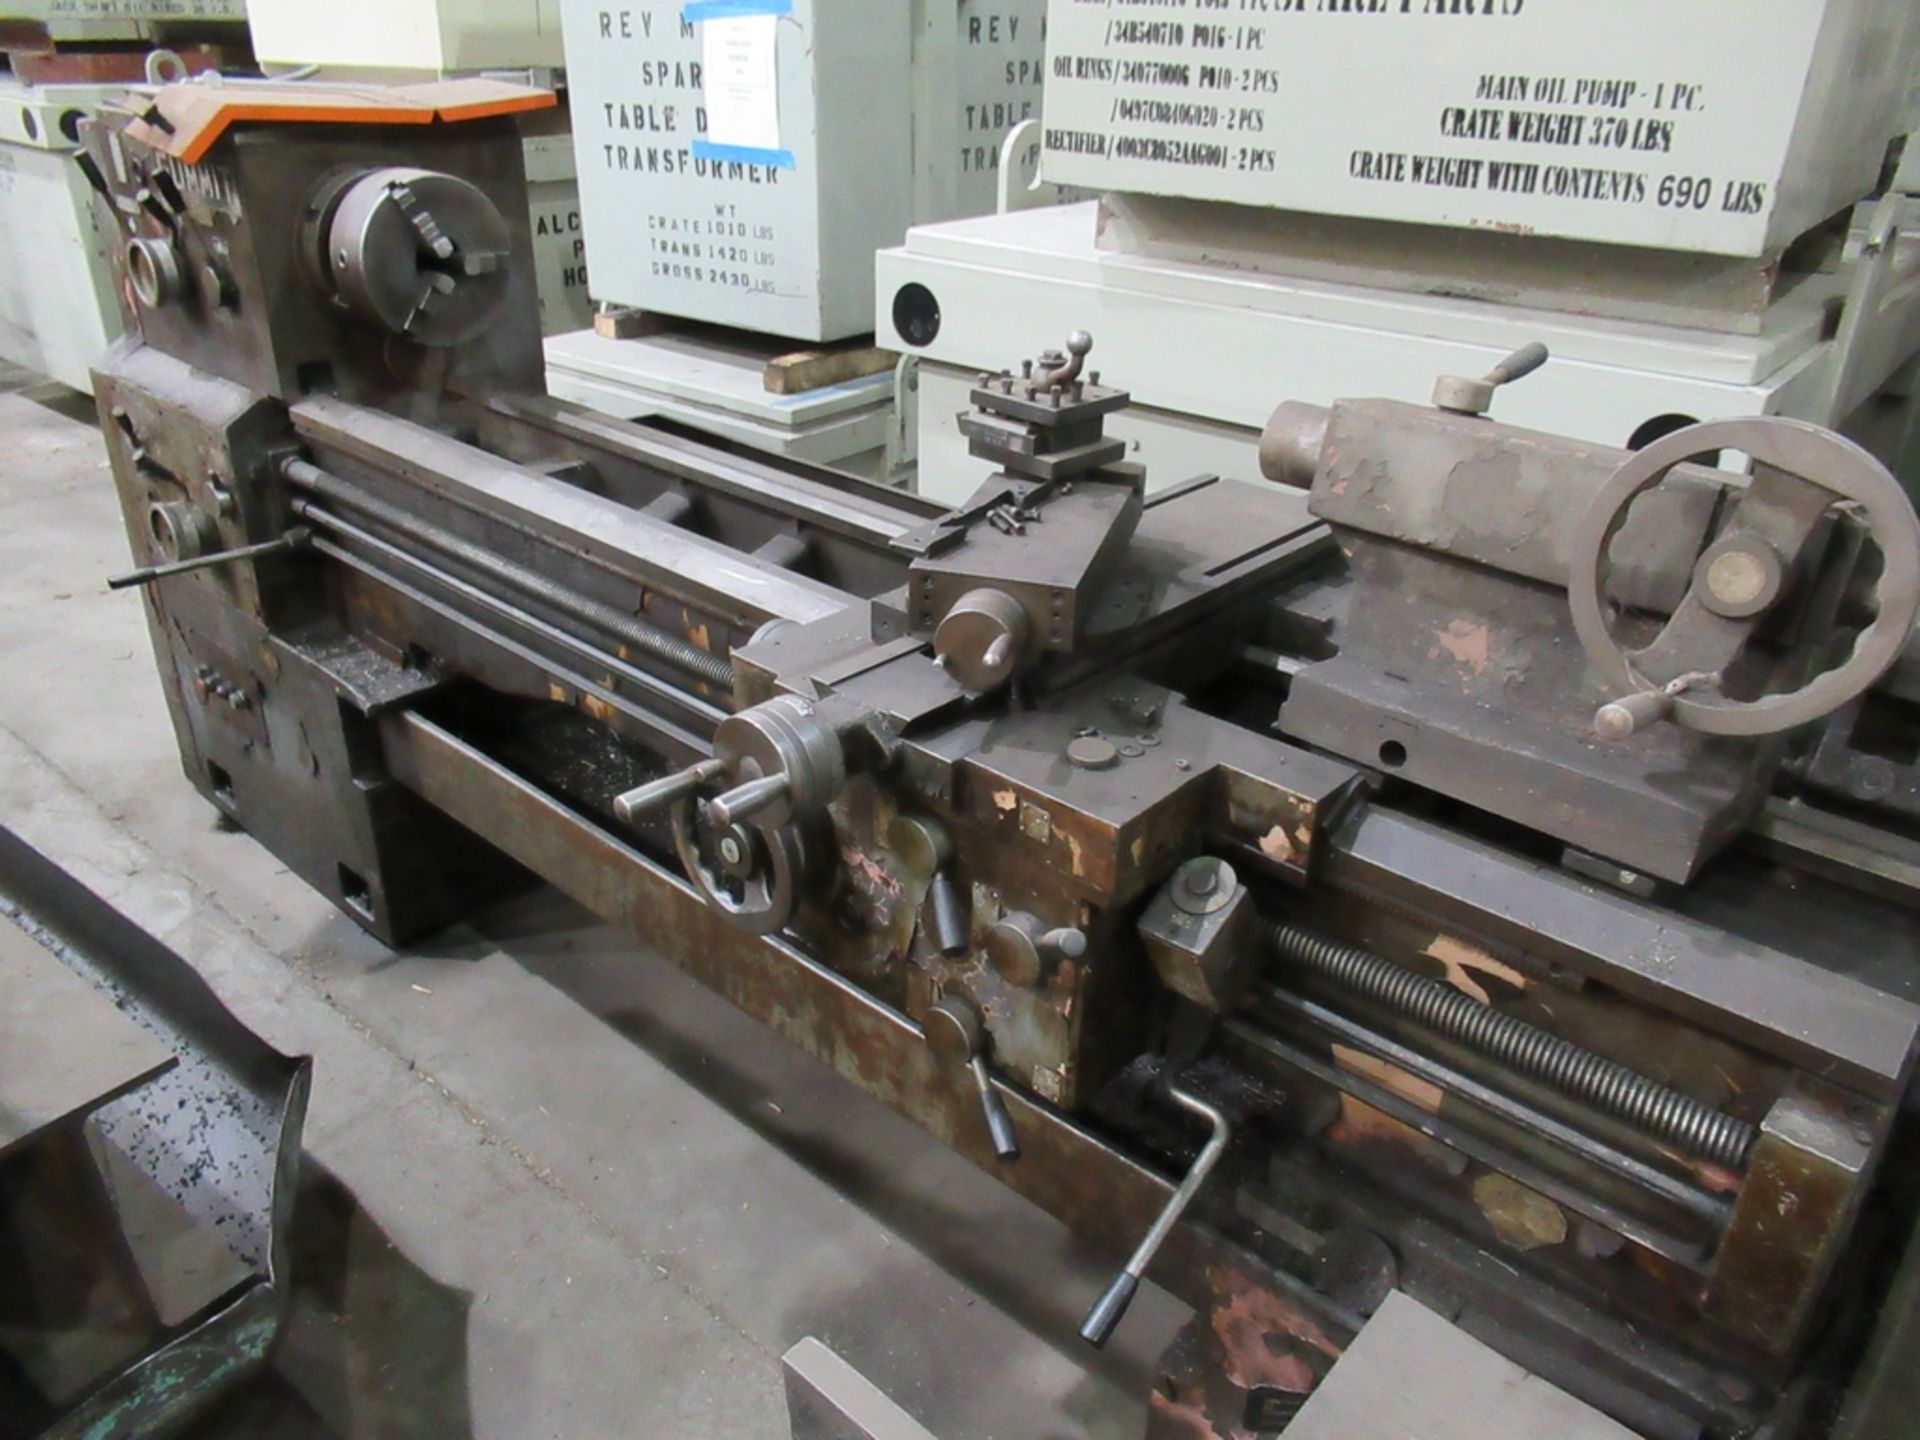 AXELSON 24”X72” TOOL ROOM LATHE, S/N 1264, SPINDLE SPEEDS TO 555 RPM, INCH THREADING, Loading Fee $ - Image 3 of 3